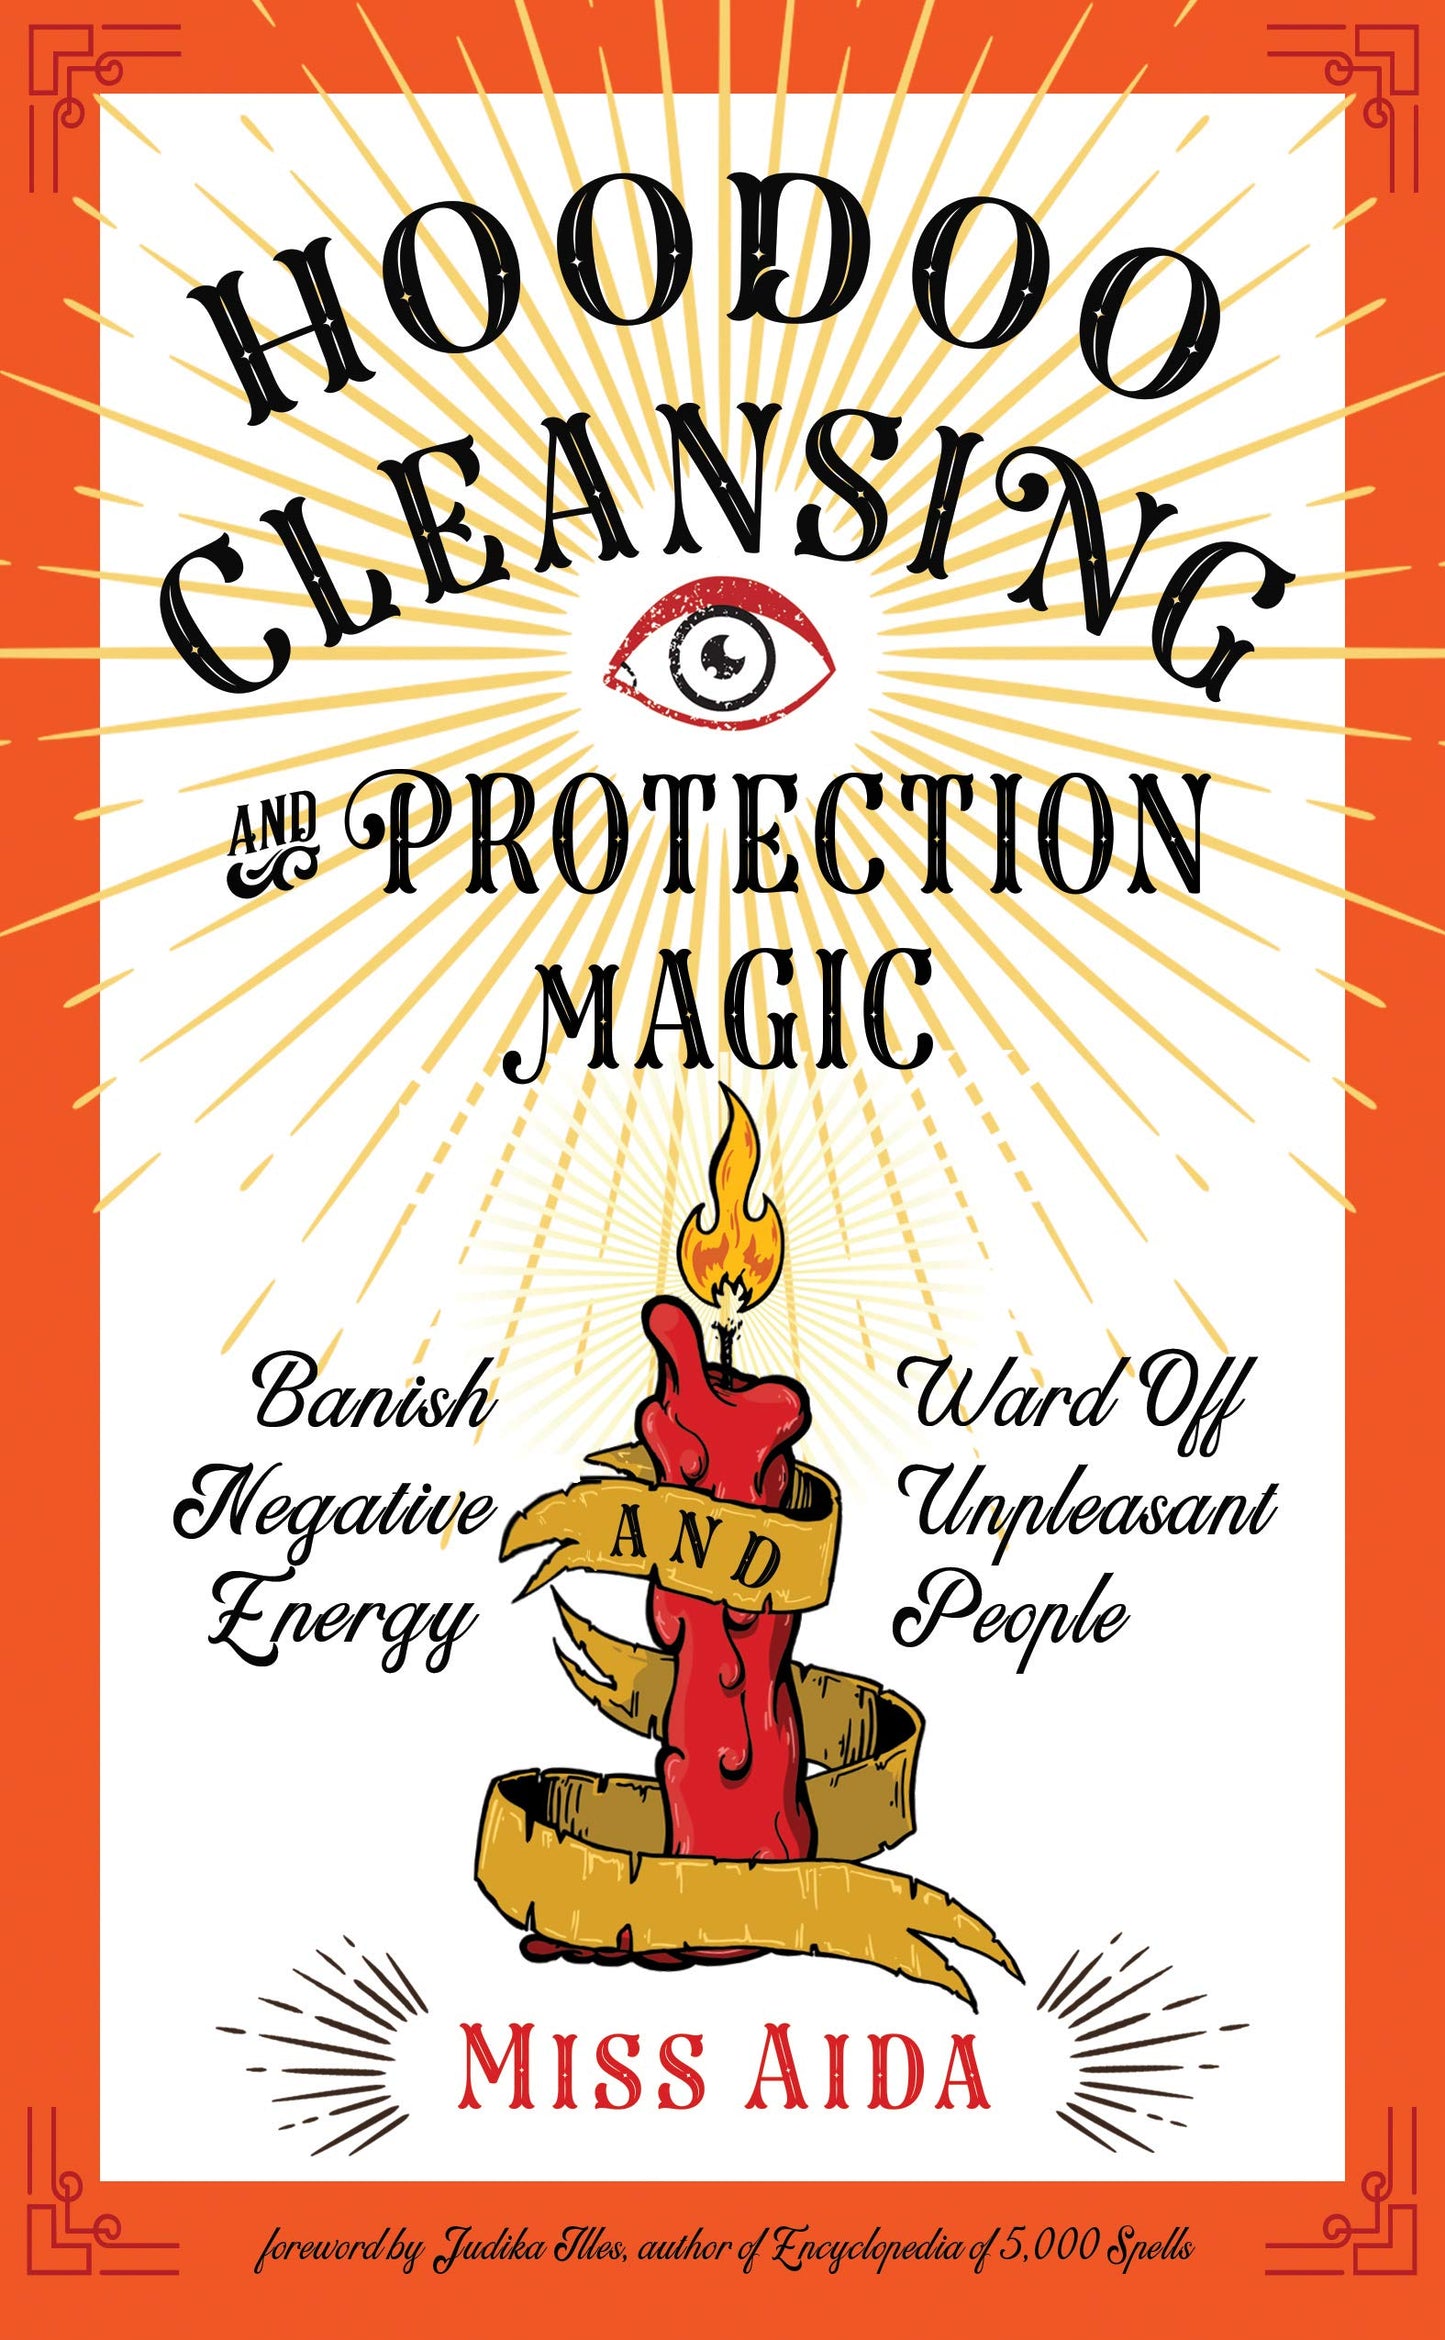 
                  
                    Hoodoo Cleansing and Protection Magic: Banish Negative Energy and Ward Off Unpleasant People
                  
                